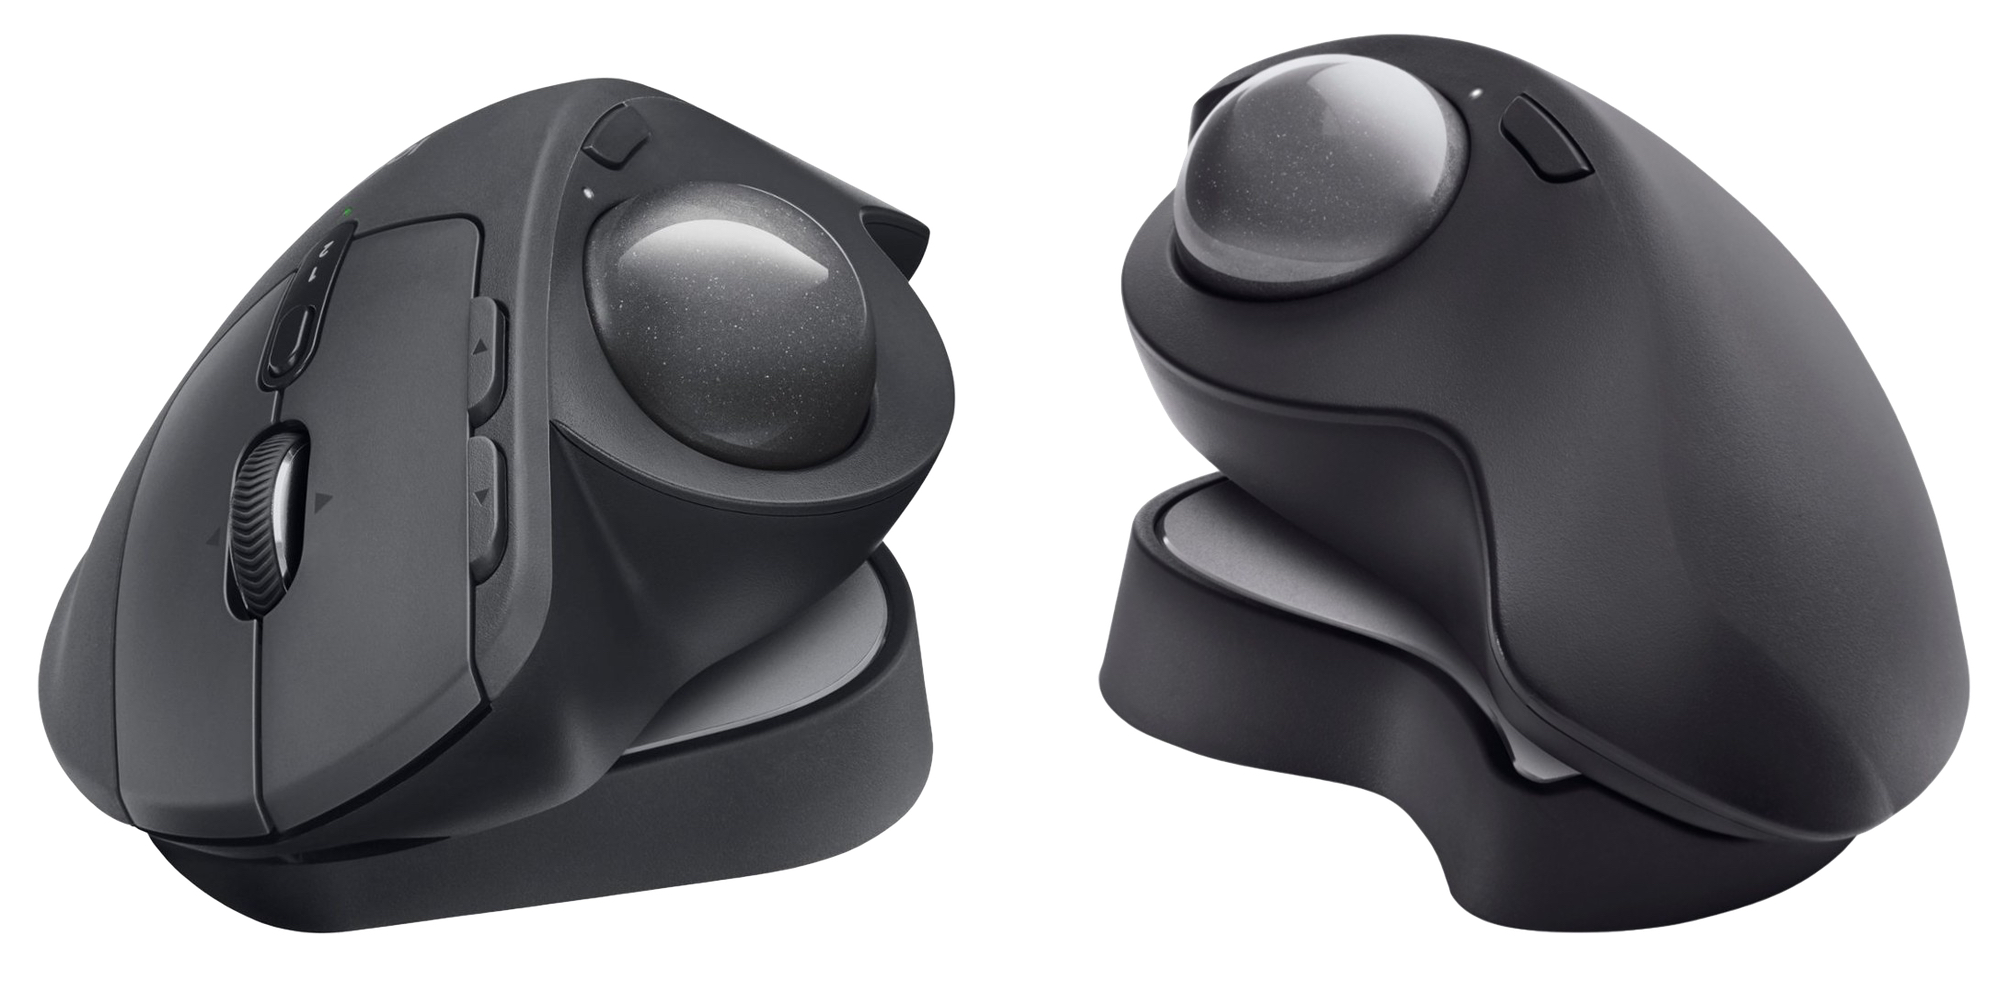 Add Logitech's MX ERGO Plus Trackball Mouse to your Mac setup at $80